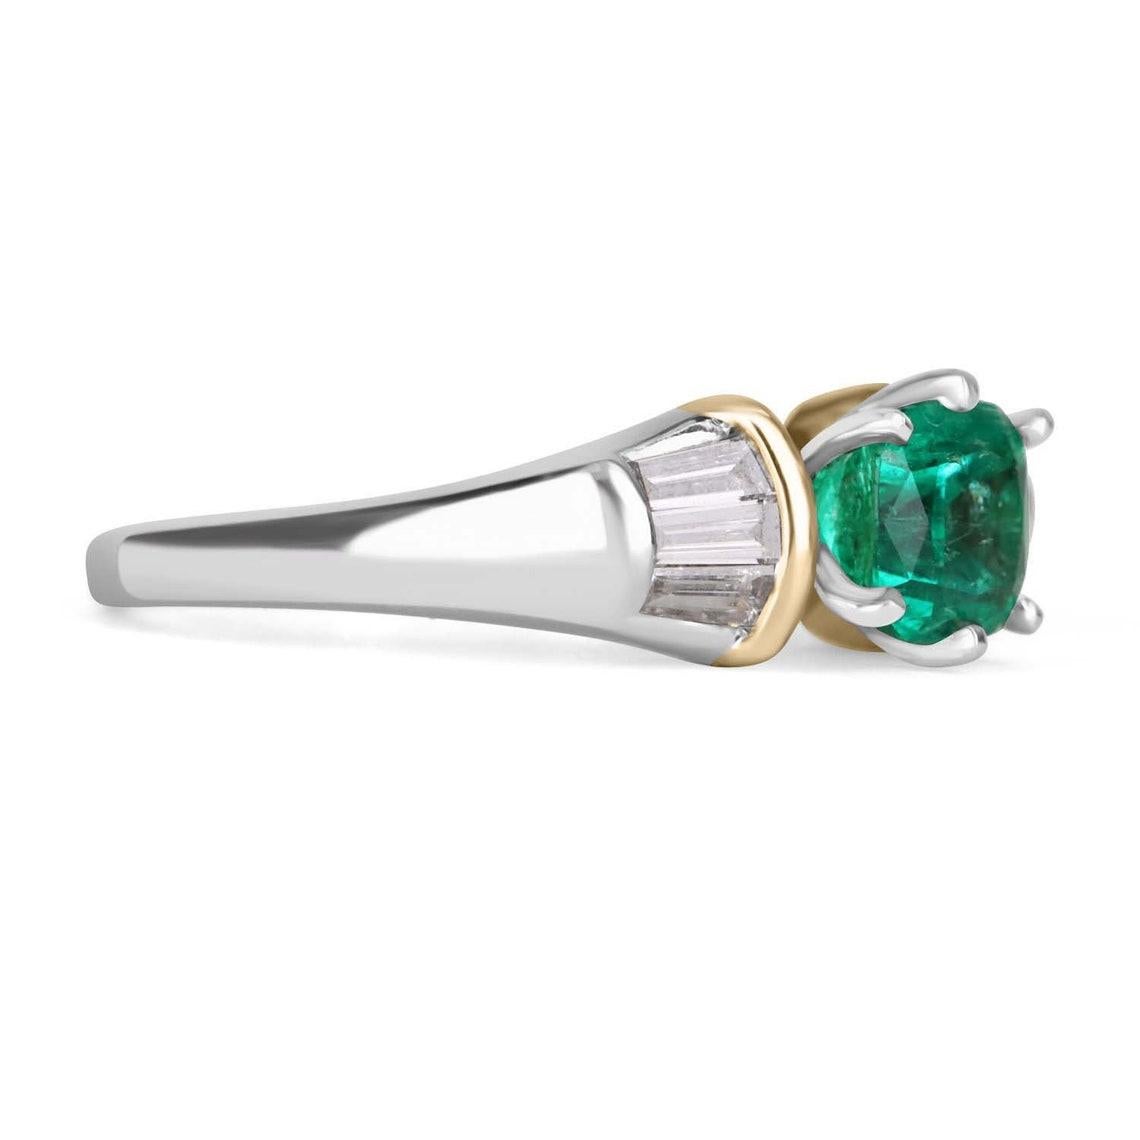 Displayed is a stunning AAA-quality Colombian emerald cushion and tapered baguette diamond ring. The center gemstone is a TOP quality Muzo mined emerald cushion handset in a six-prong secure setting that allows for a full view of the emerald. This